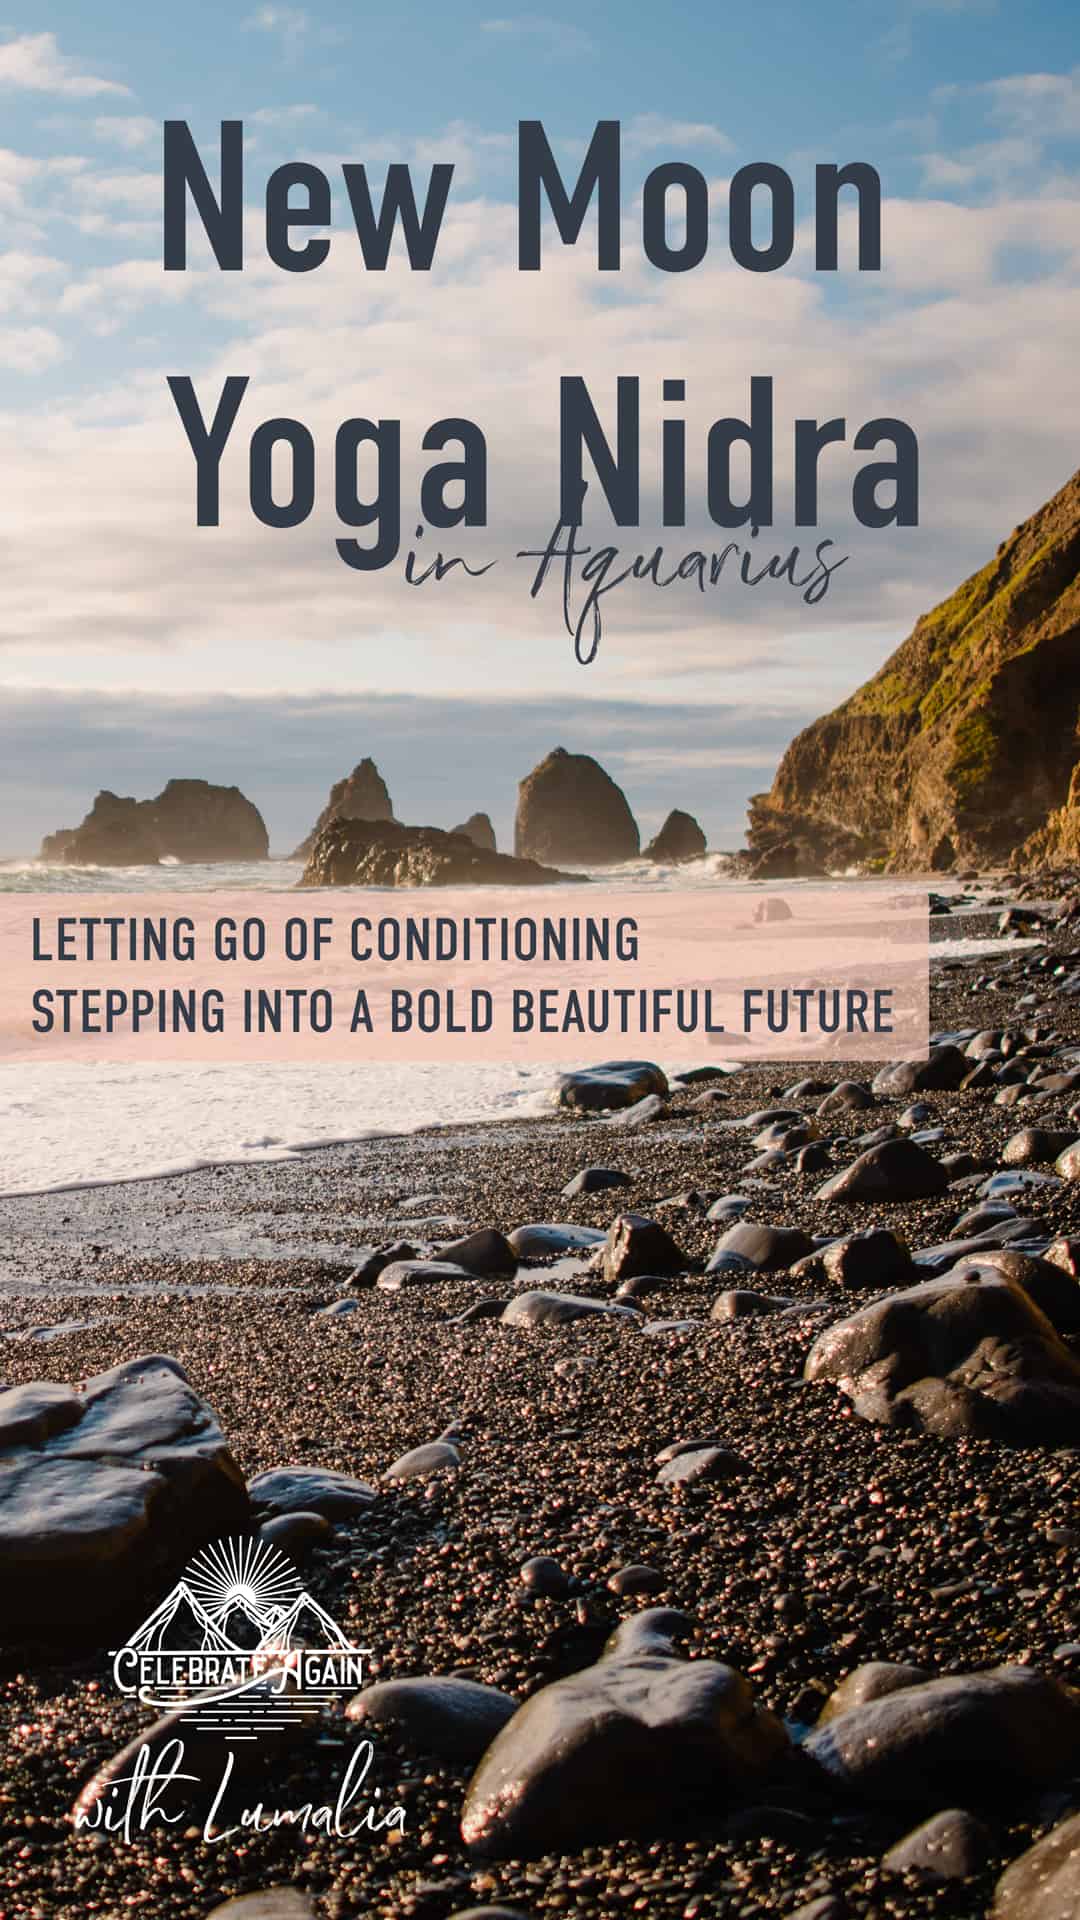 "New moon yoga nidra in aquarius Letting go of conditioning stepping into a Bold Beautiful future with Lumalia" on top of a photo of a beach with a cliff face and rocks